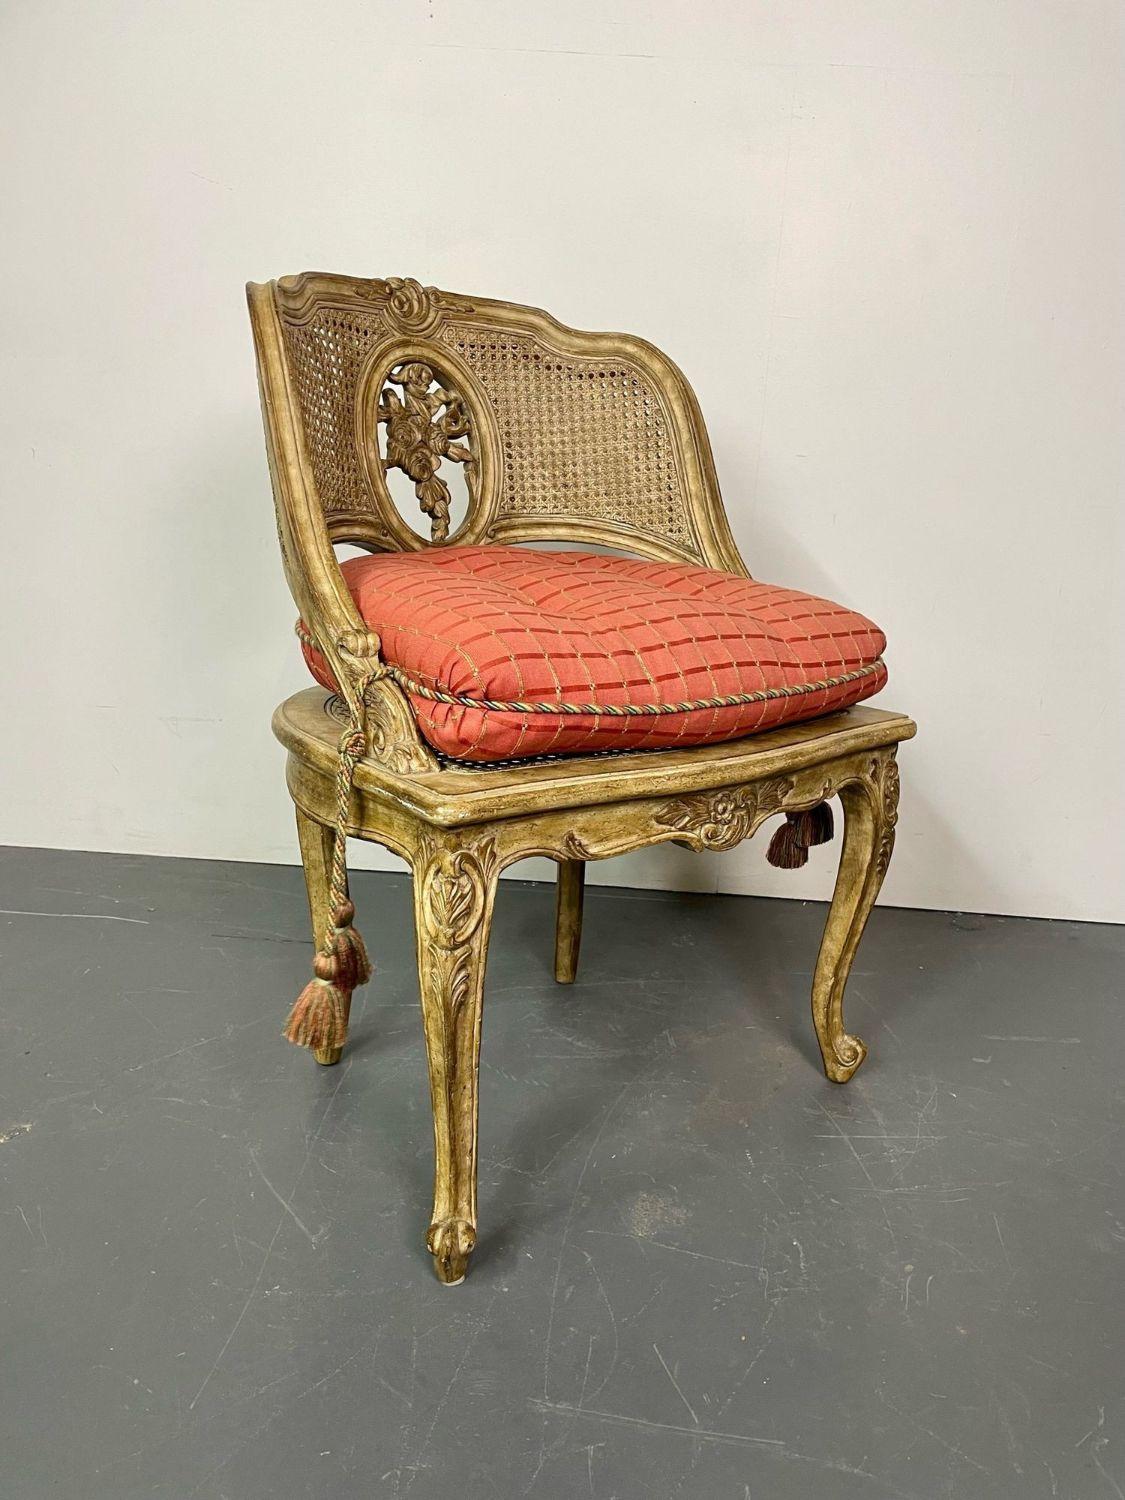 20th Century Louis XV Style Boudoir Chair, Vanity or Hall Chair, Tufted Pillow and Tassels For Sale